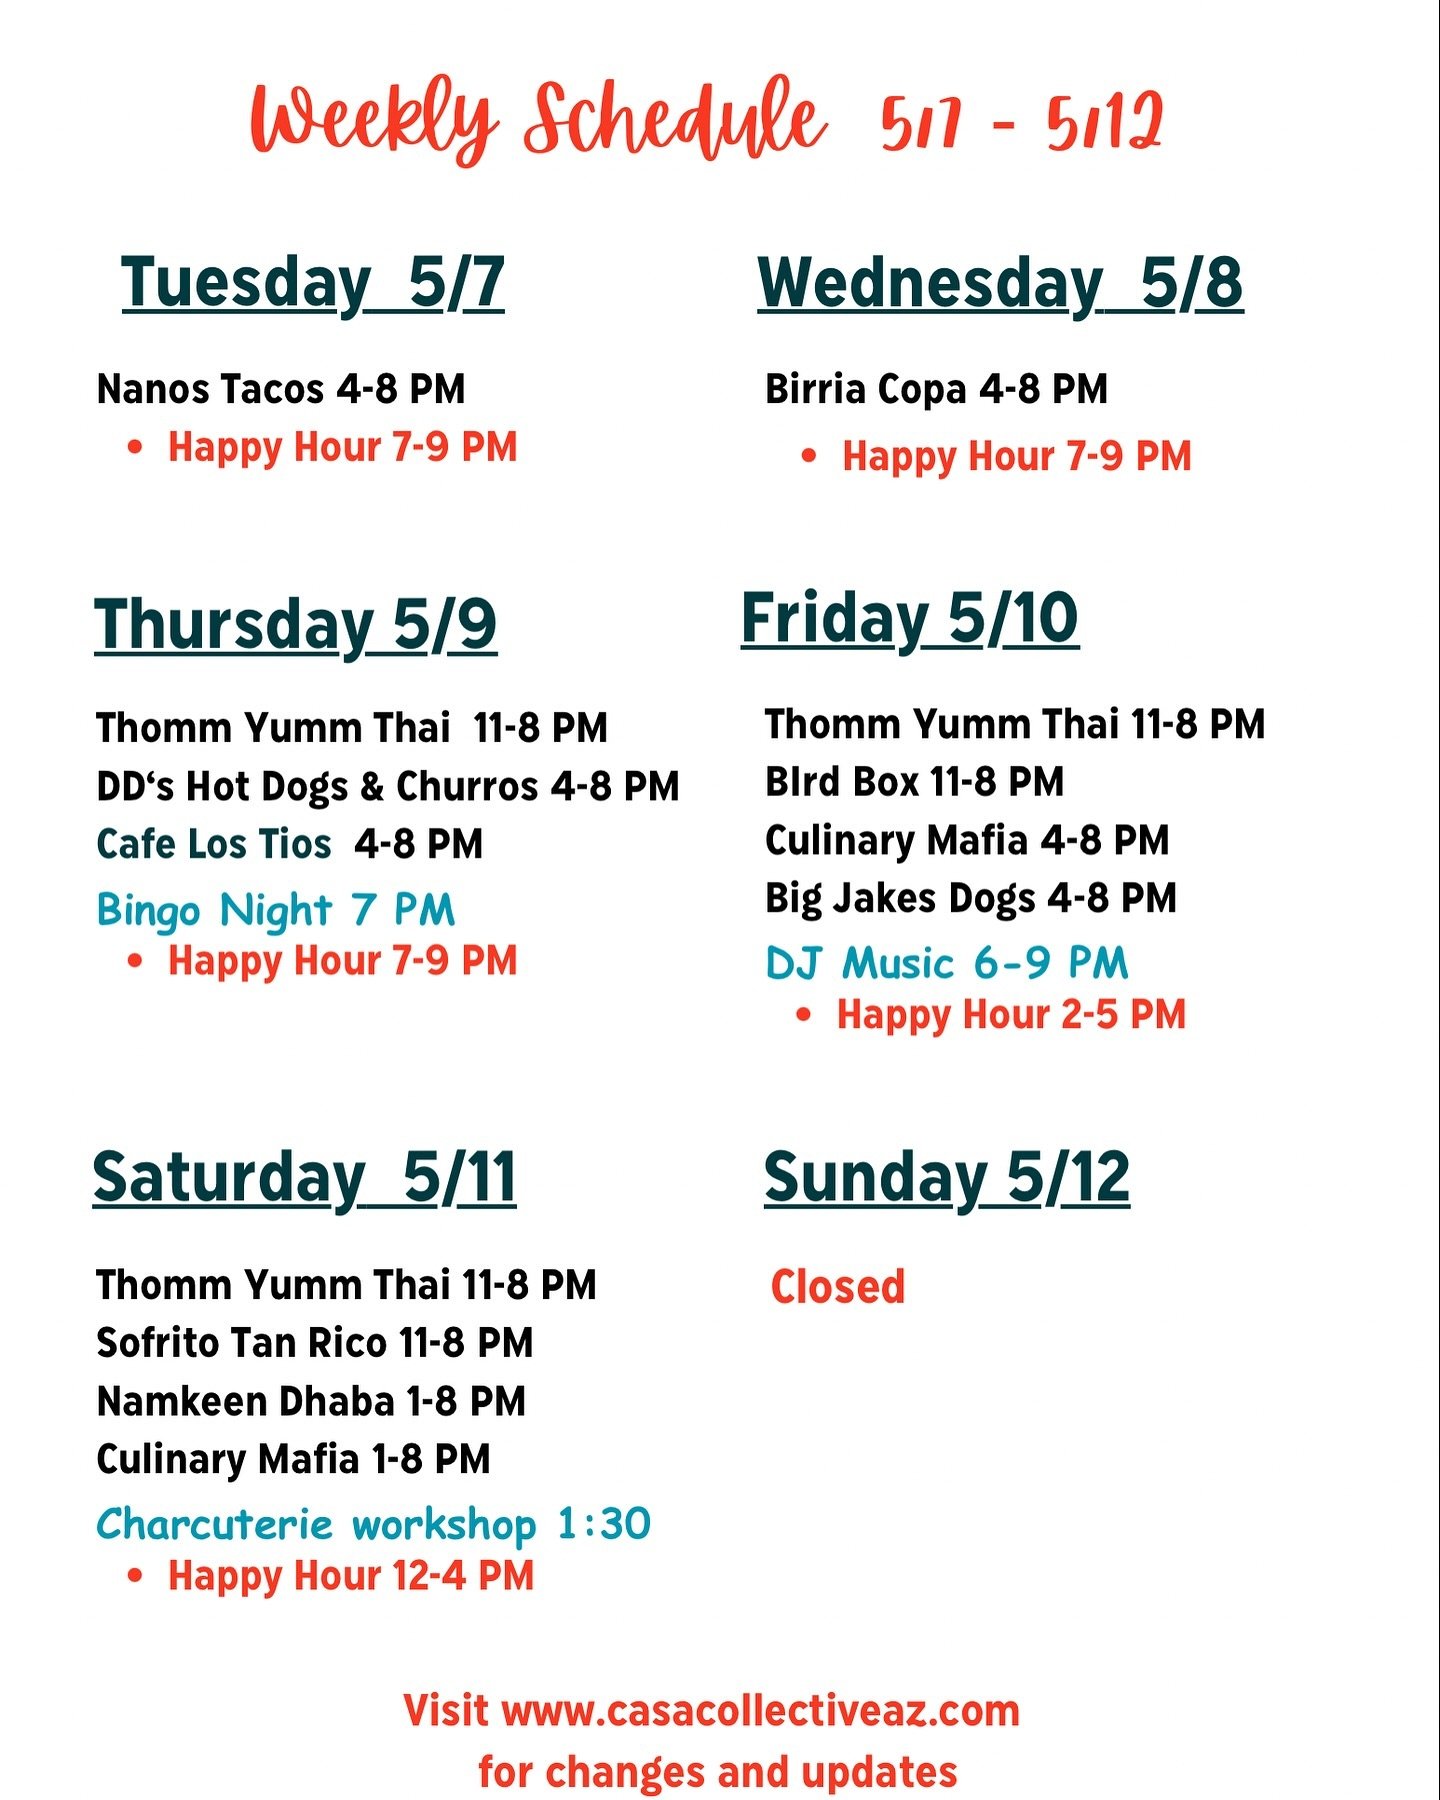 Here is our food truck schedule for this week! Note we will be closed on Sunday for Mother&rsquo;s Day. See you in the Pub!